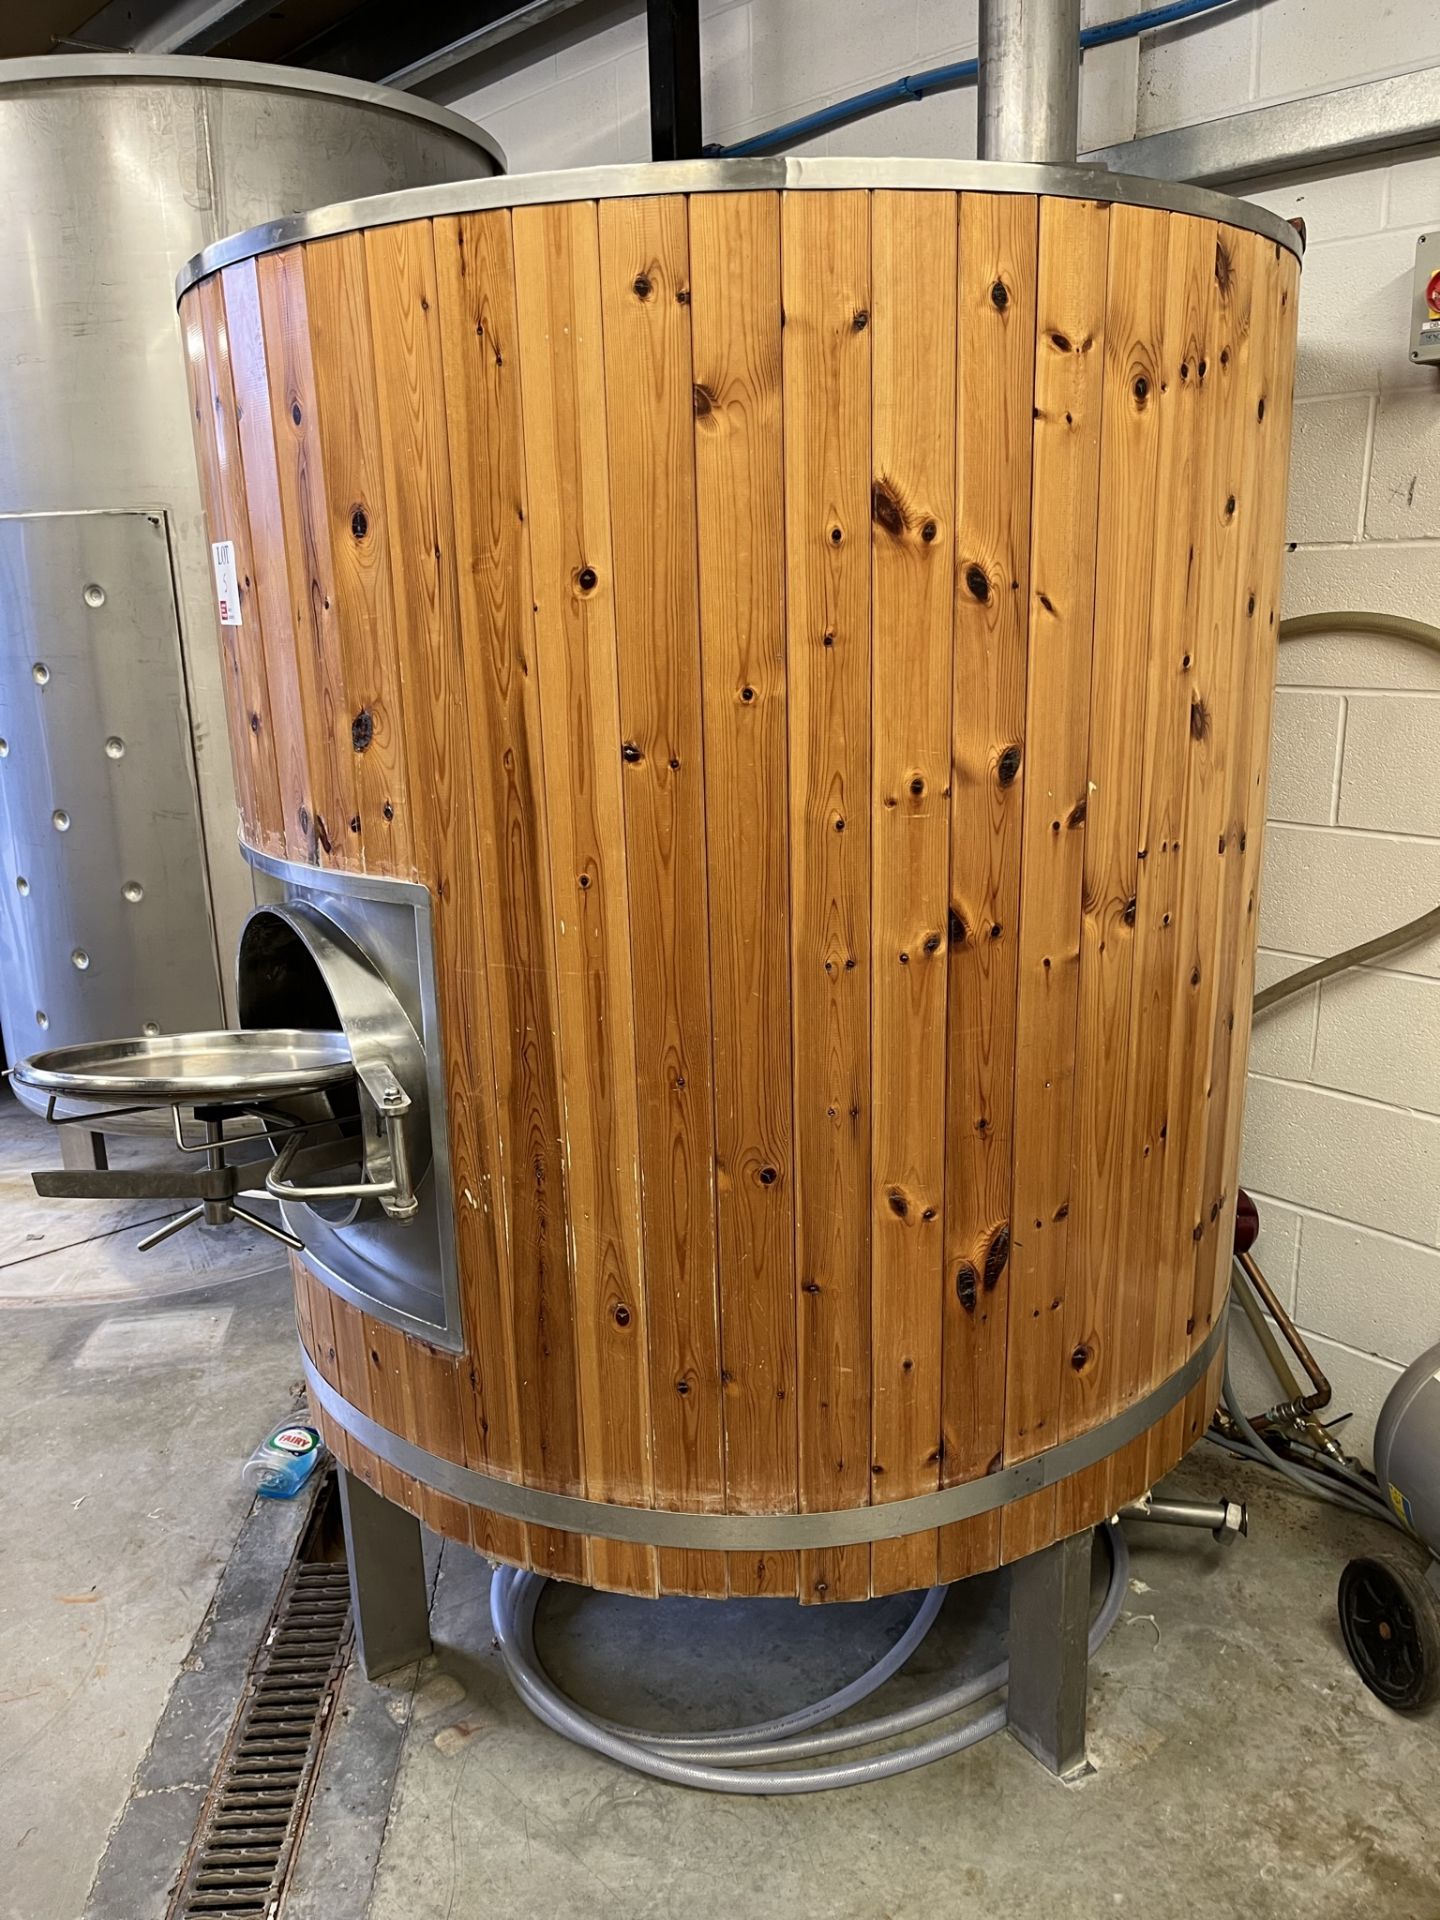 Timber clad jacketed stainless steel mash tank with twin heating elements. - Image 3 of 4